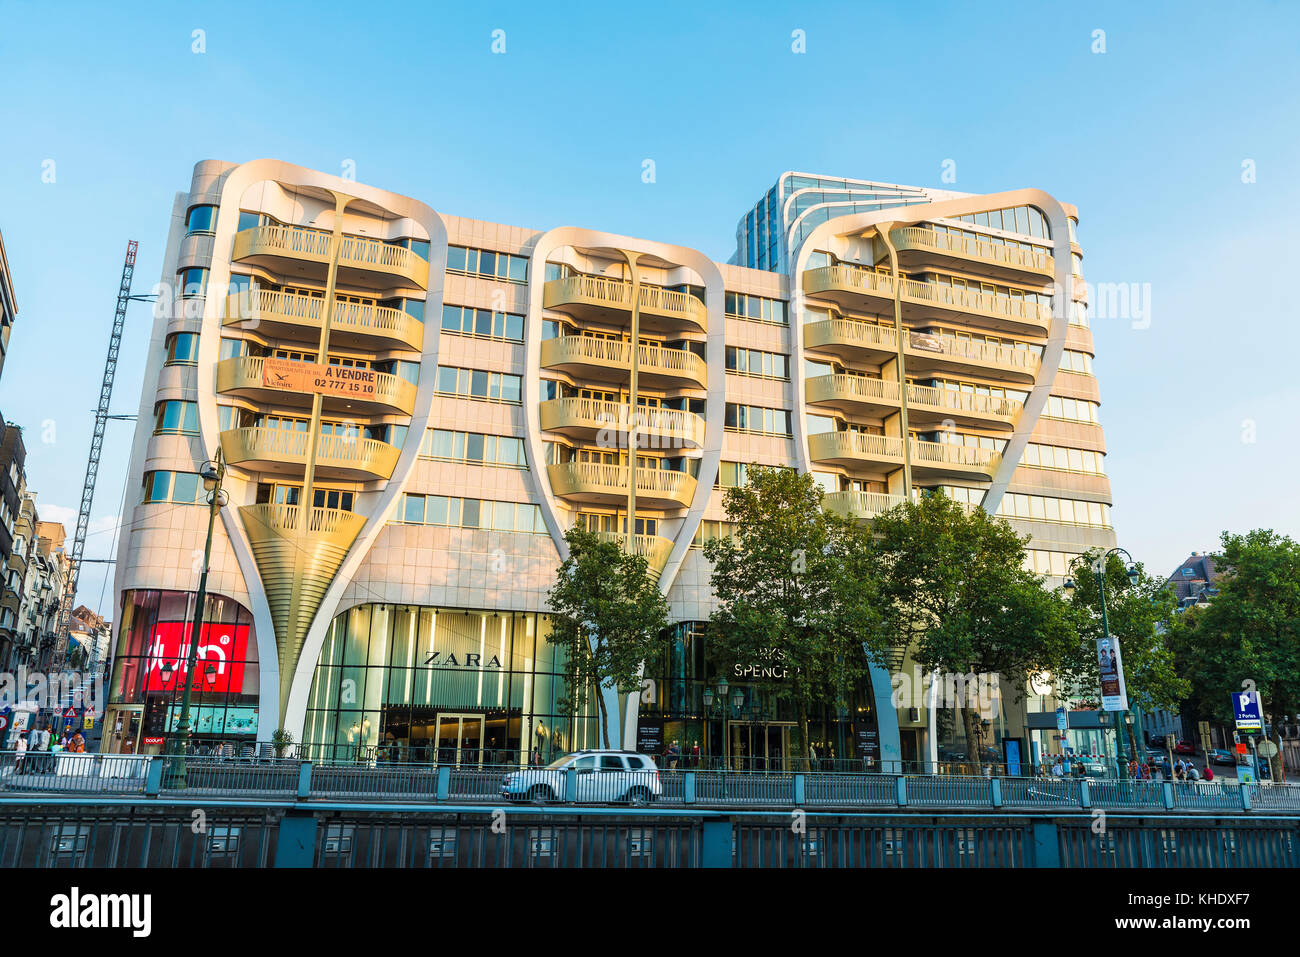 Brussels, Belgium - August 27, 2017: Facade of a modern building with a Zara  shop in Brussels, Belgium Stock Photo - Alamy